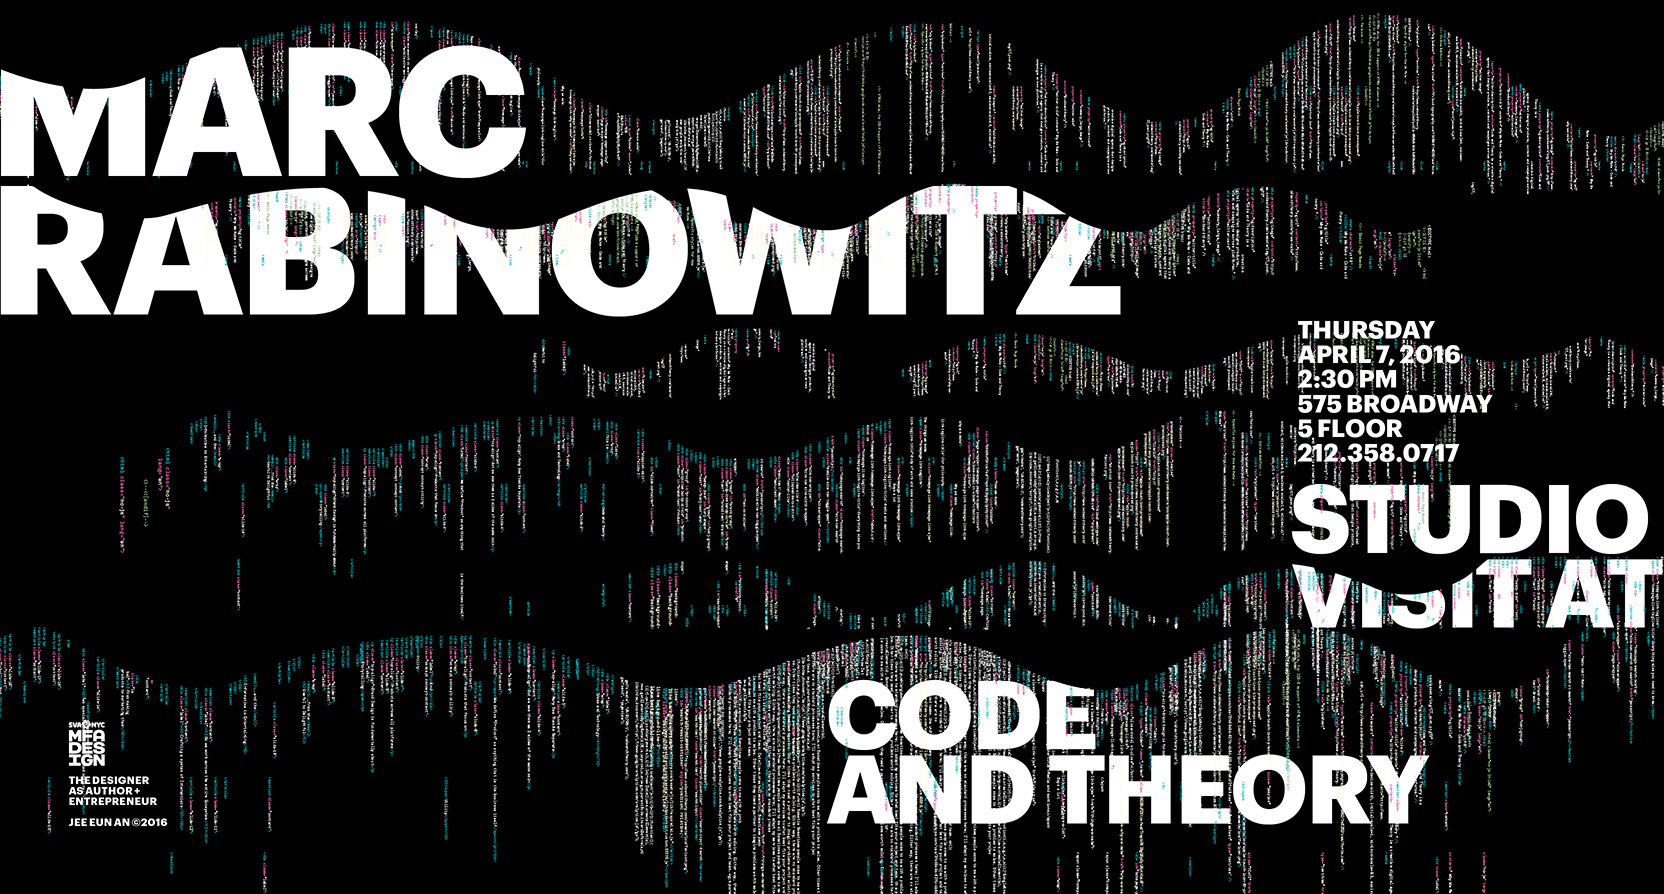 A black and white poster with wave like white text: Marc Rabinowitz. Code and Theory.